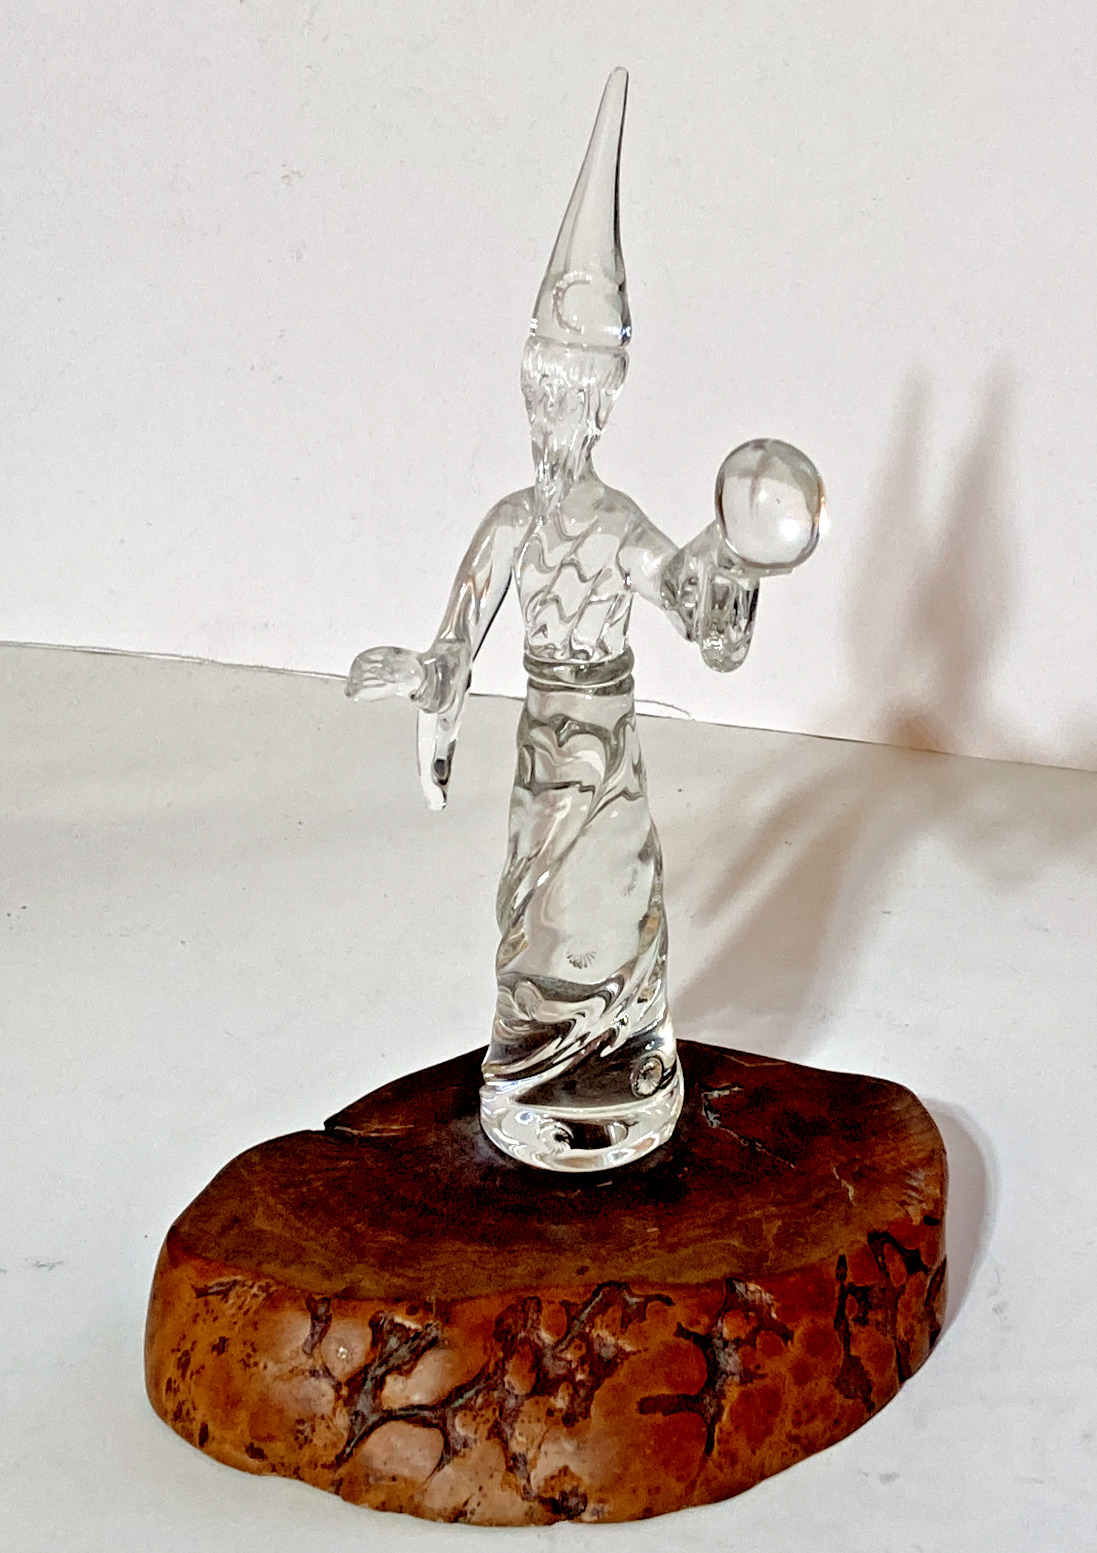 Hand-blown glass Wizard/Merlin Figurine Vintage '90s -- 9 inches tall